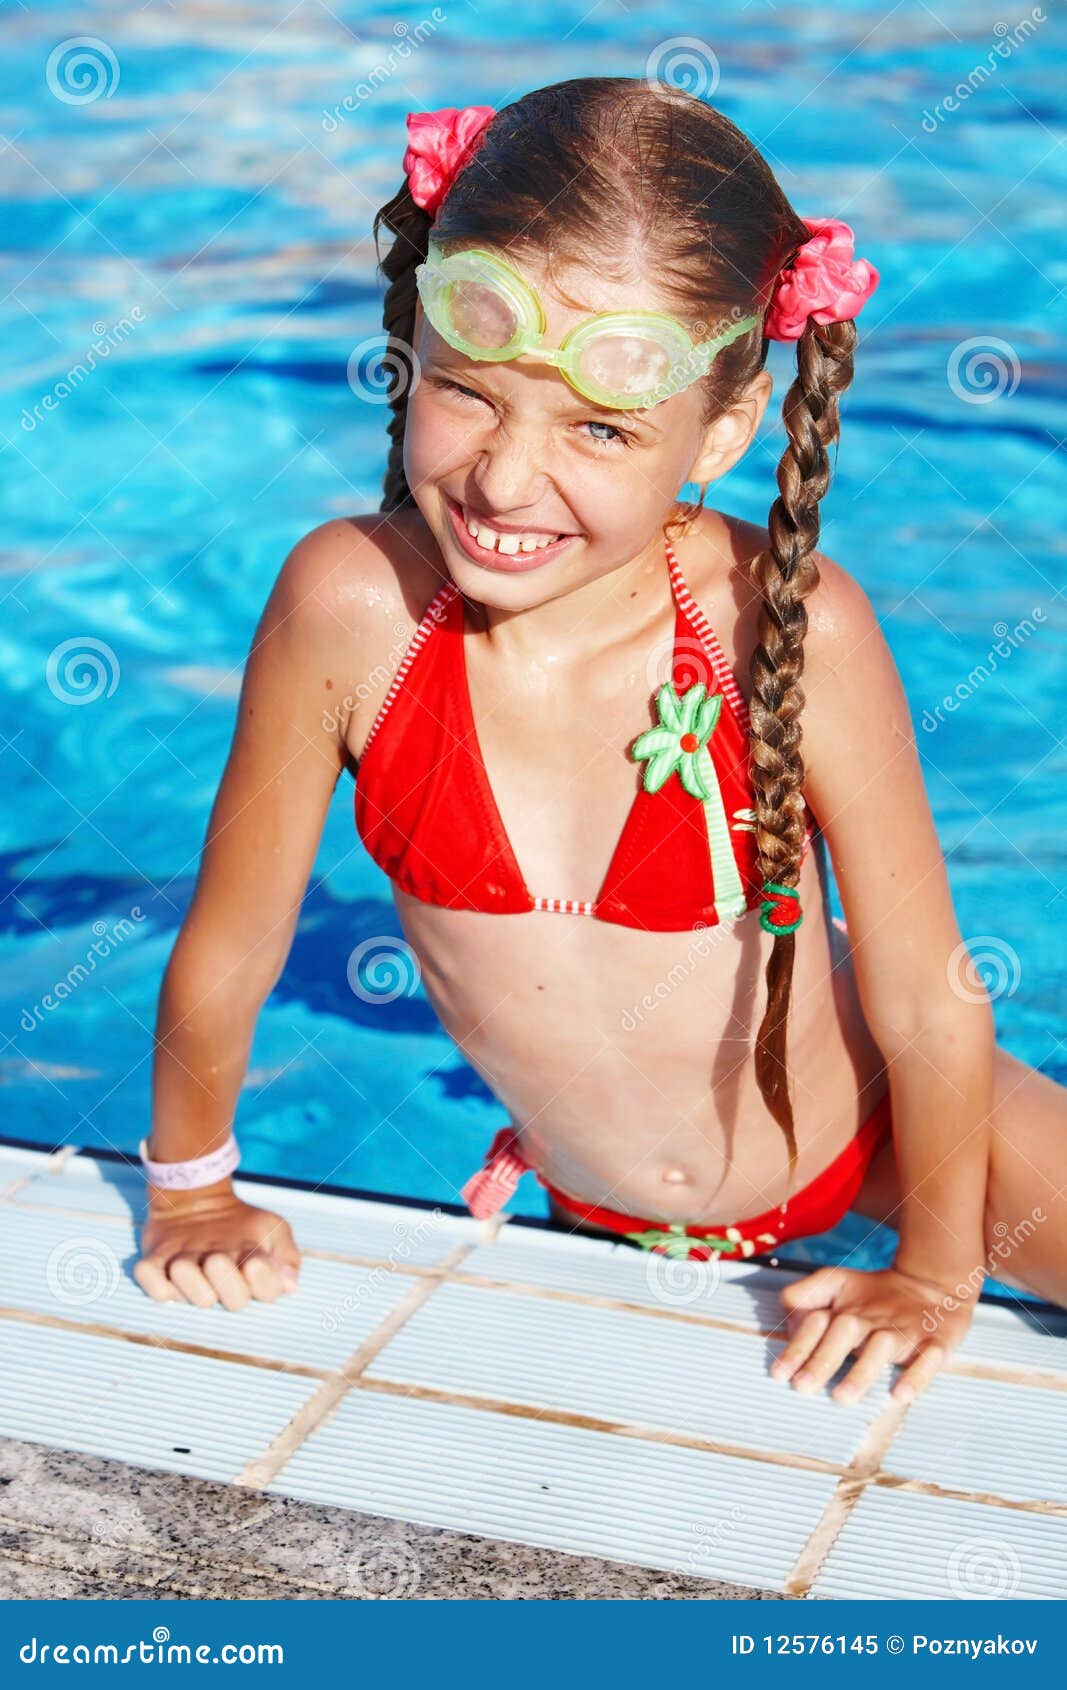 Girl with Goggles, Red Swimsuit in Swimming Pool Stock Image ...